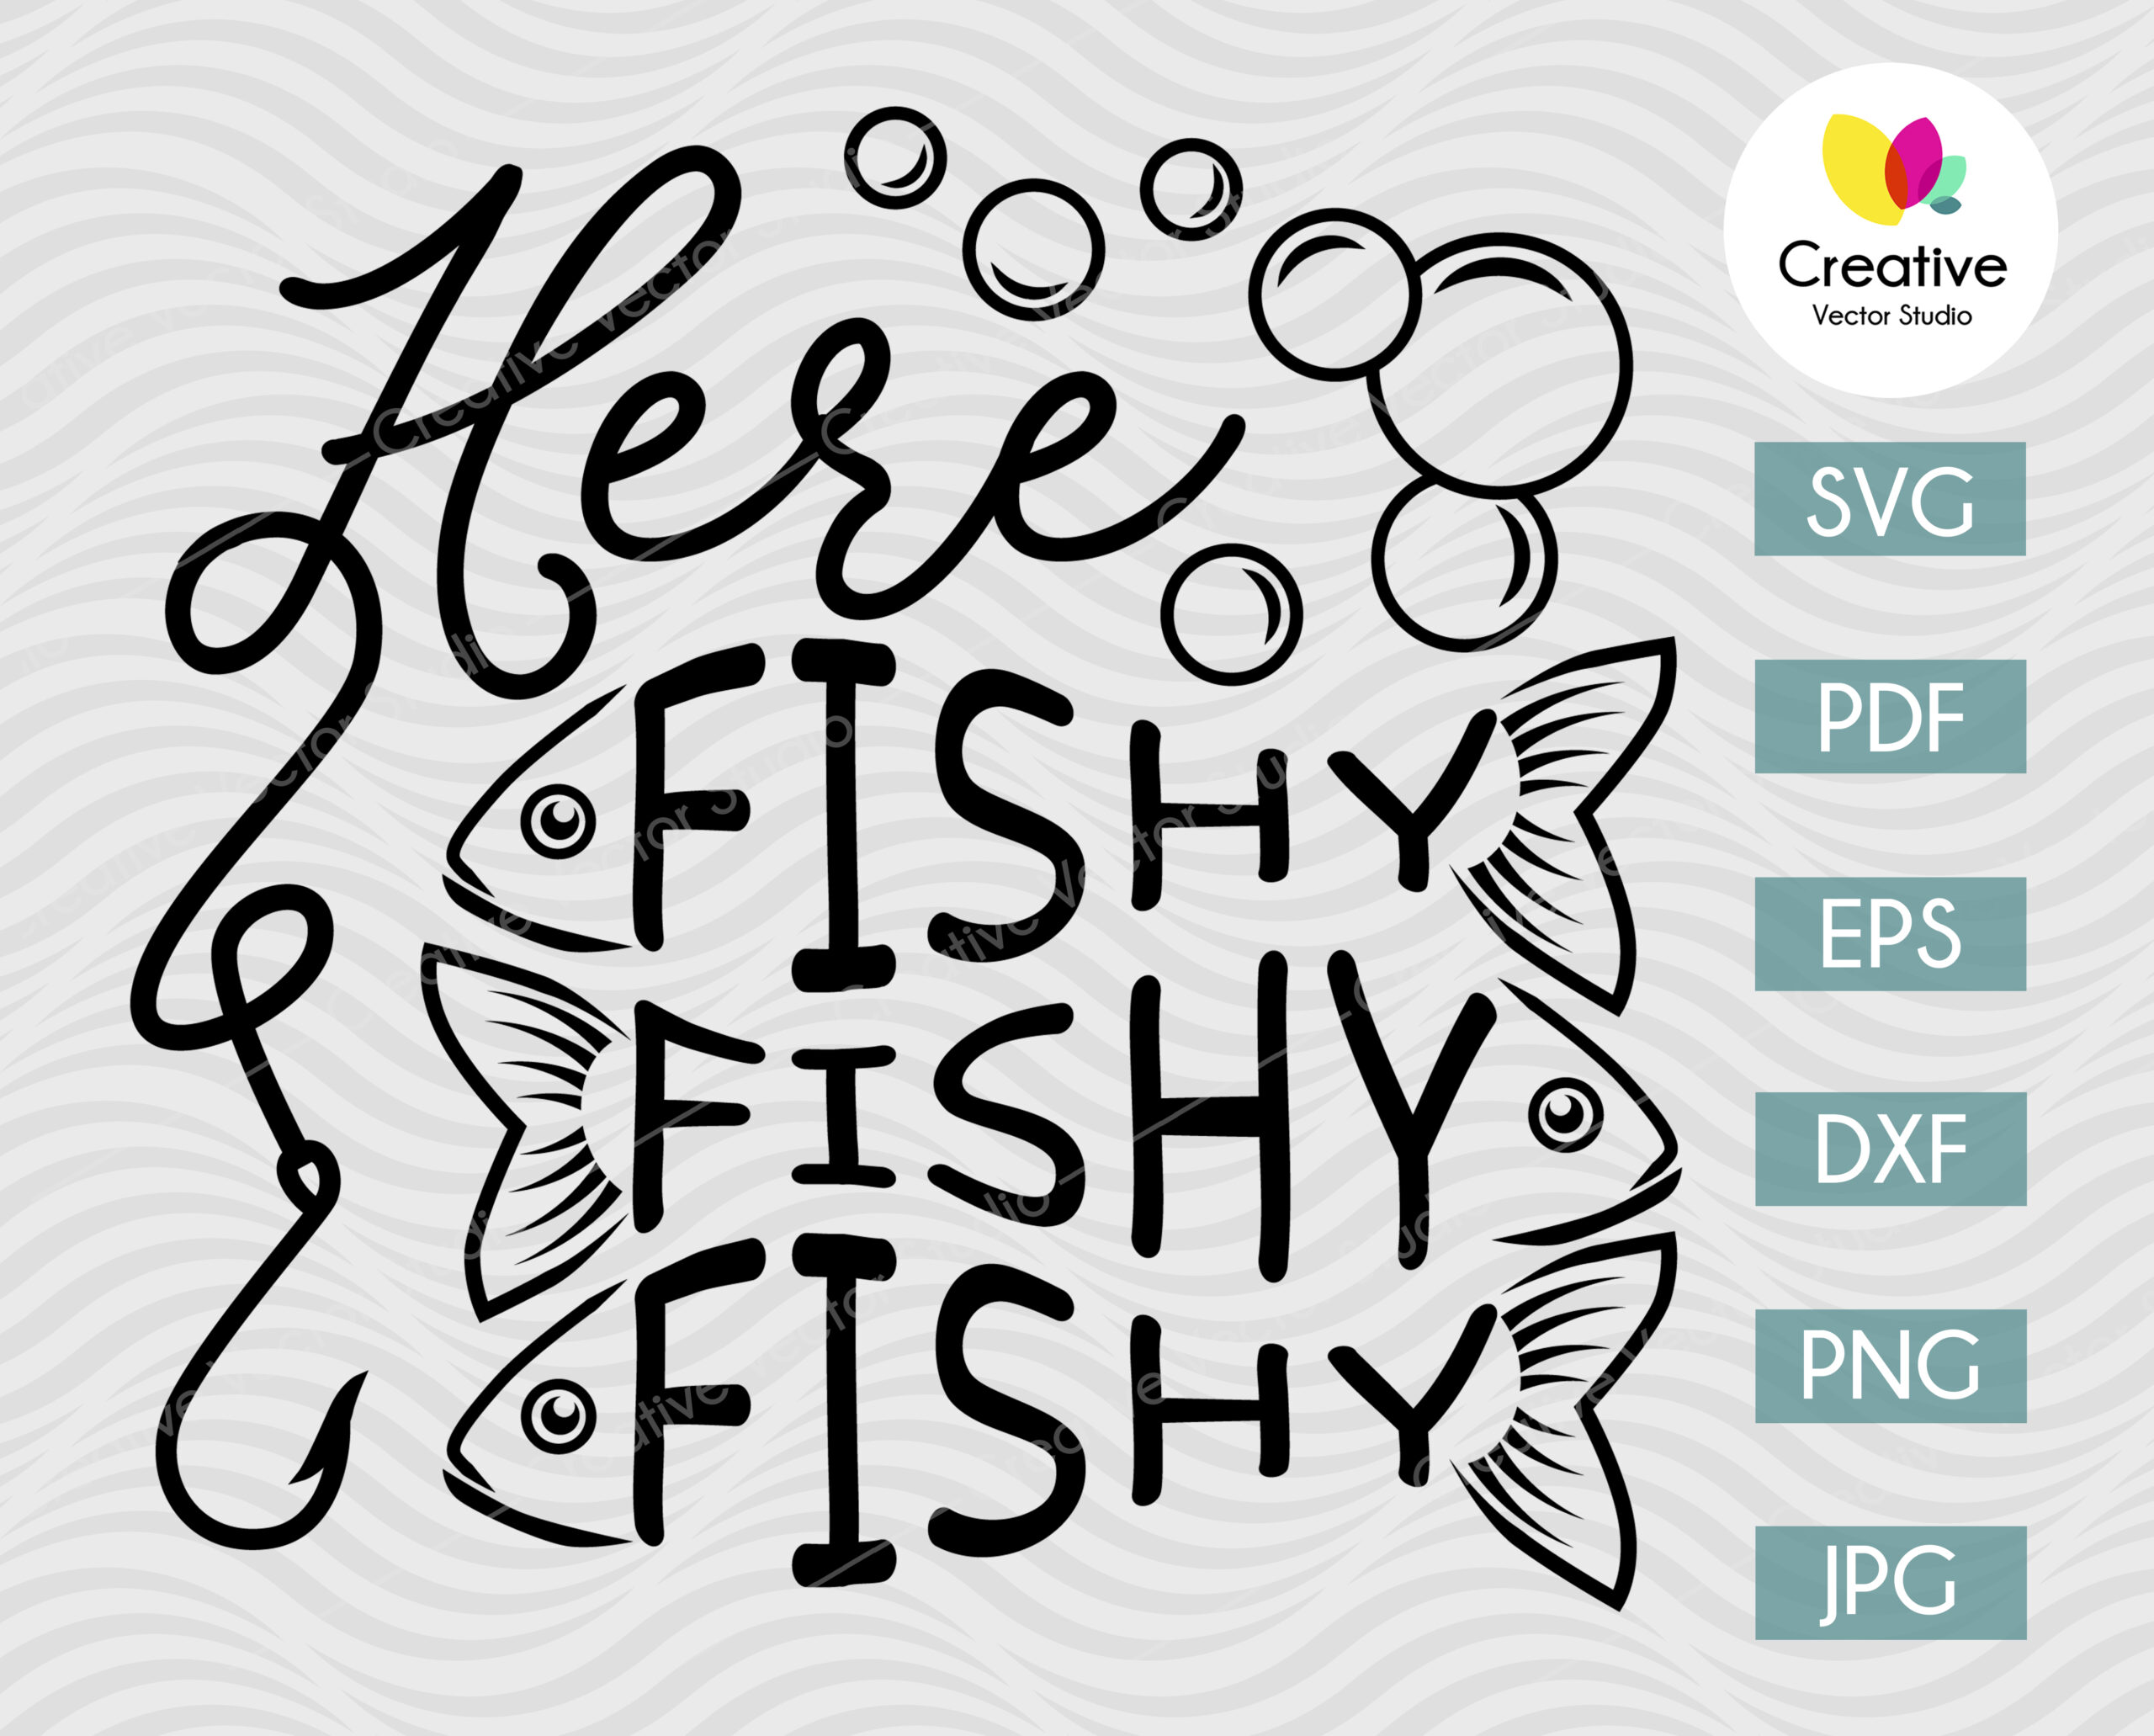 Download Fishing Cut File Fishing Quote Svg Fishing Saying Funny Quote Funny Saying Fishy Svg Here Fishy Fishy Fishy Svg Funny Fishing Svg Craft Supplies Tools Collage Sheets Shantived Com